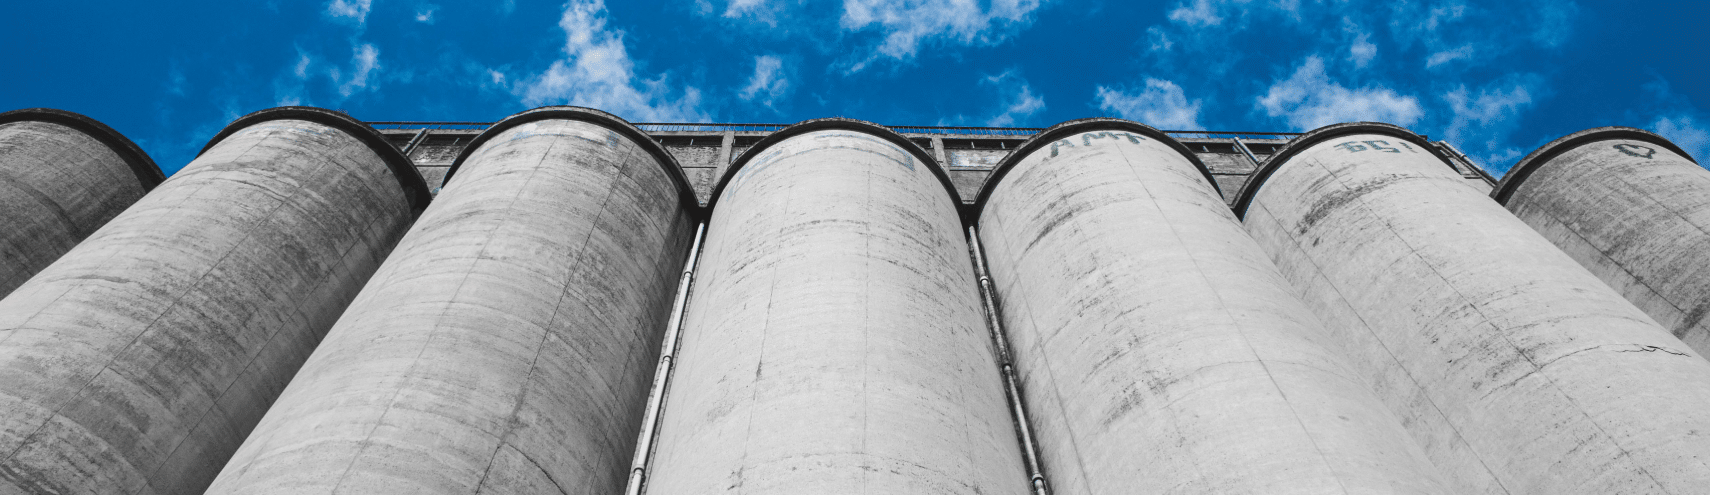 What Is a Data Silo?